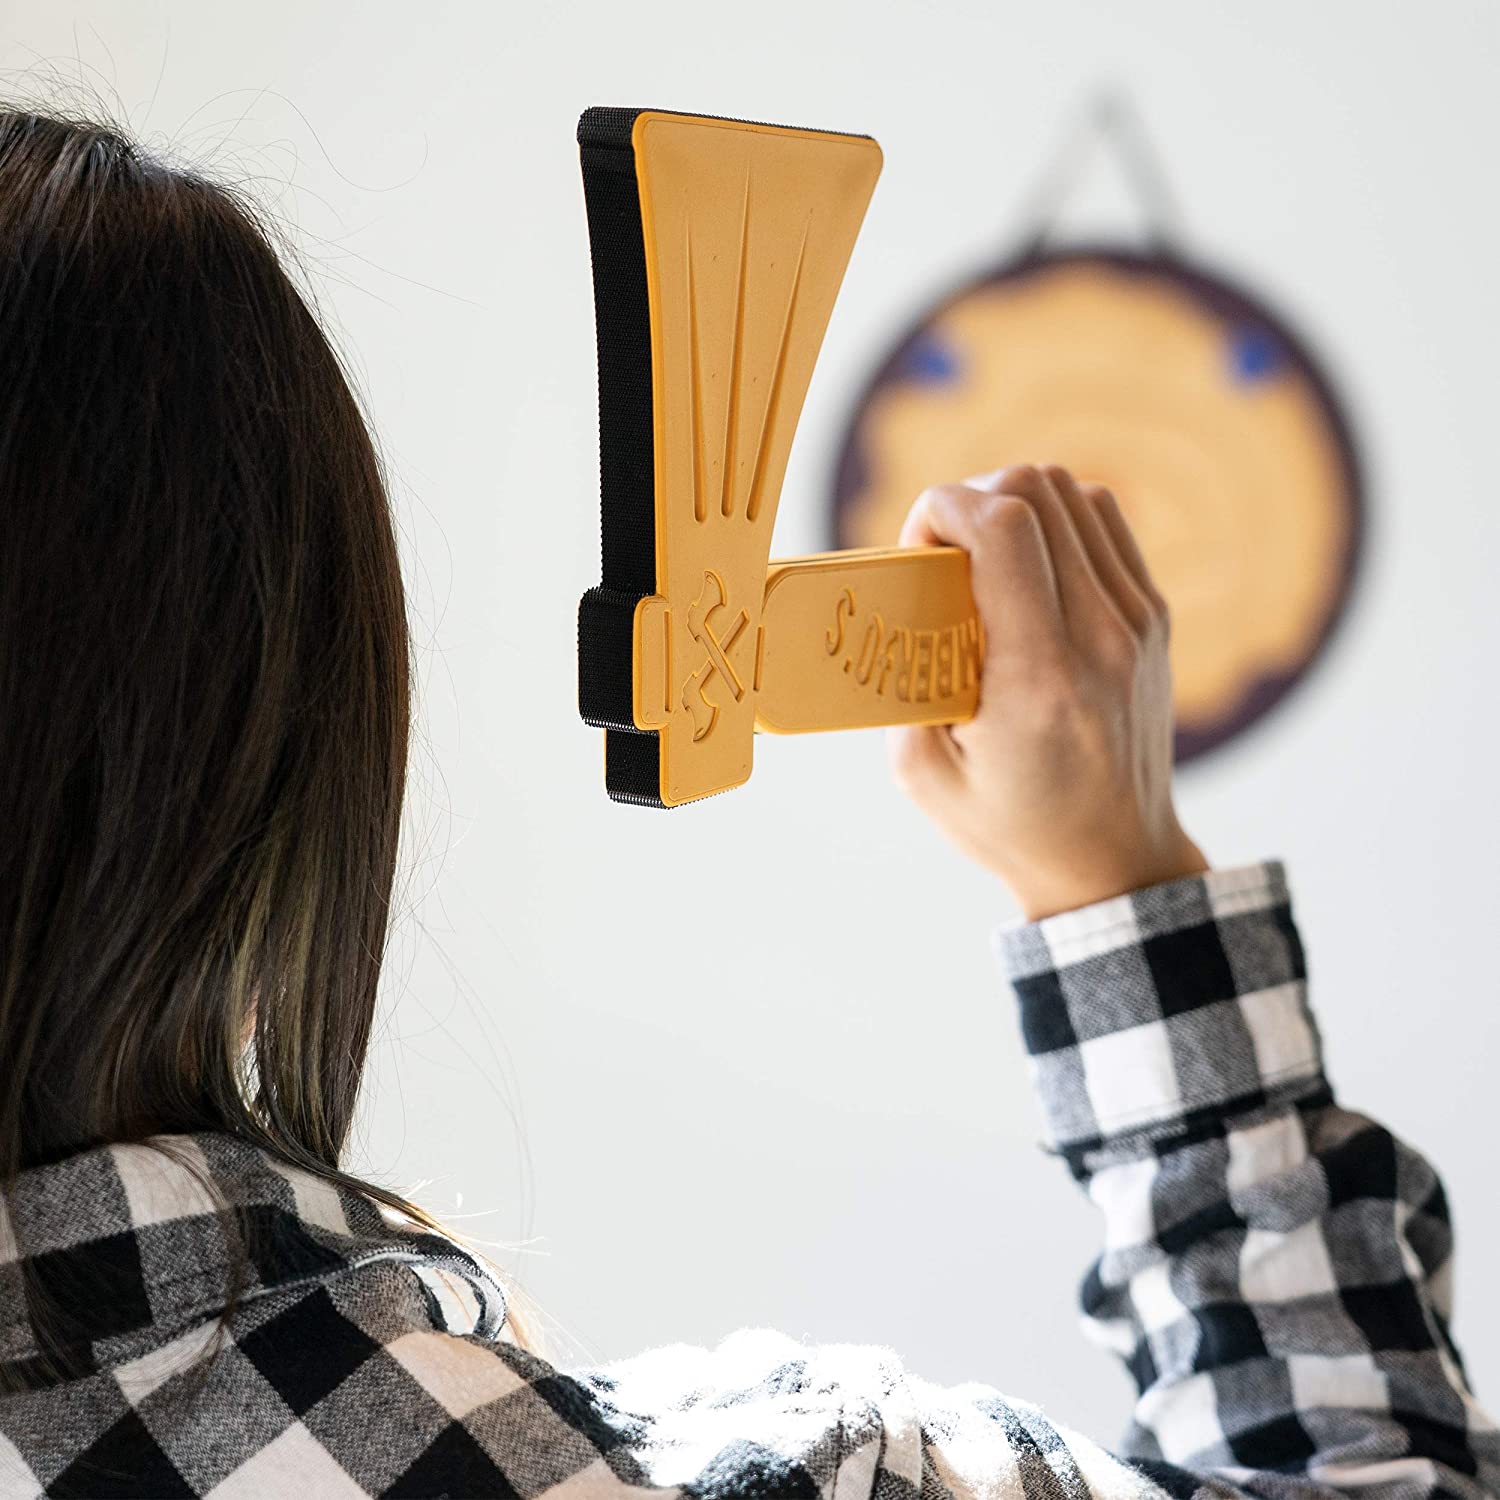 A person is about to throw a foam axe at a bullseye board.